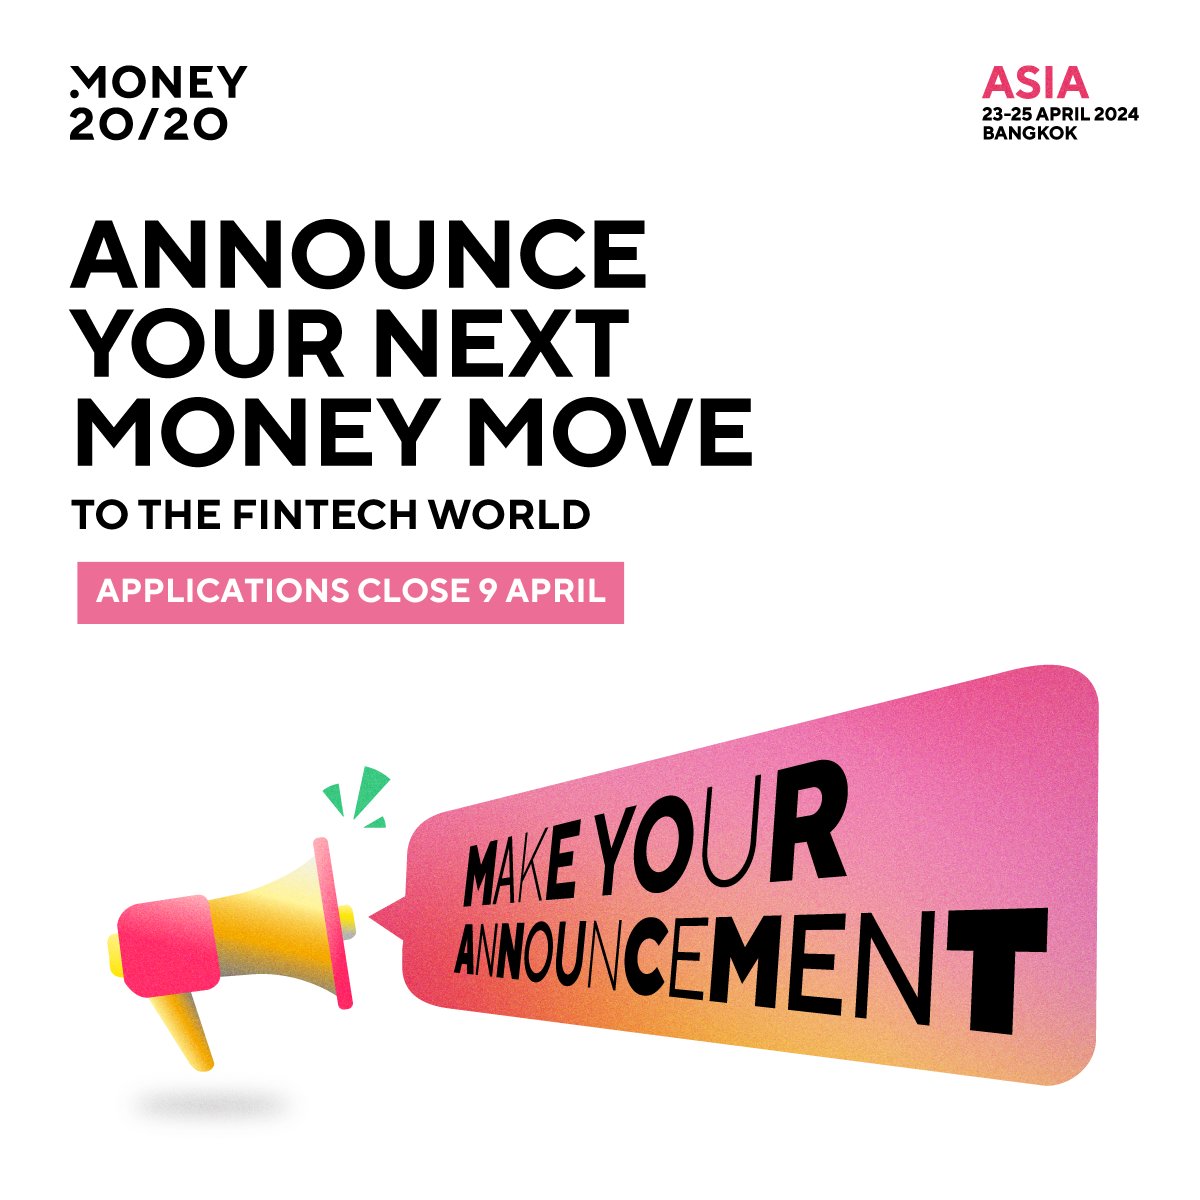 Don't miss your shot to unveil your biggest news of the year at #Money2020Asia! 📣 Submit your embargoed story or press release before 9 April and seize the spotlight in front of a global media audience: bit.ly/49kAI6n